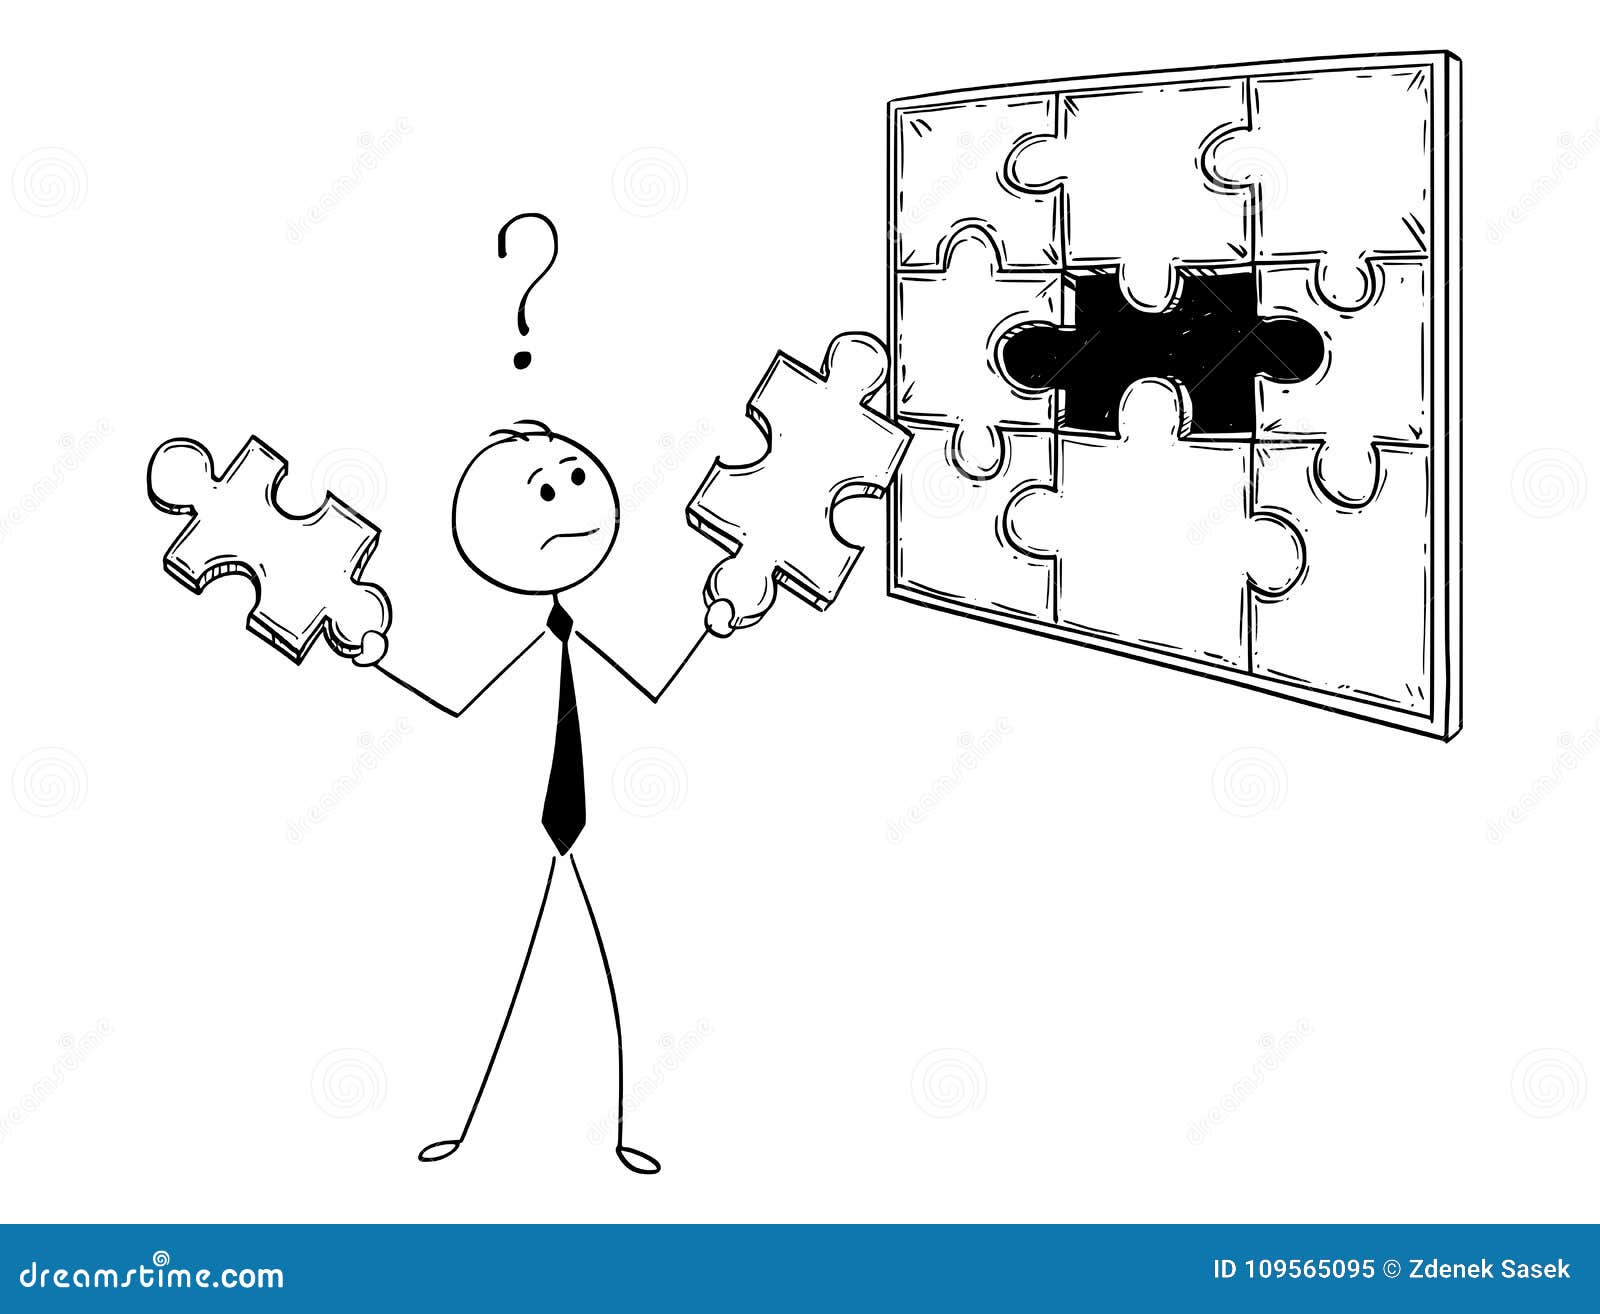 cartoon of businessman with two jigsaw puzzle pieces in hands to decide